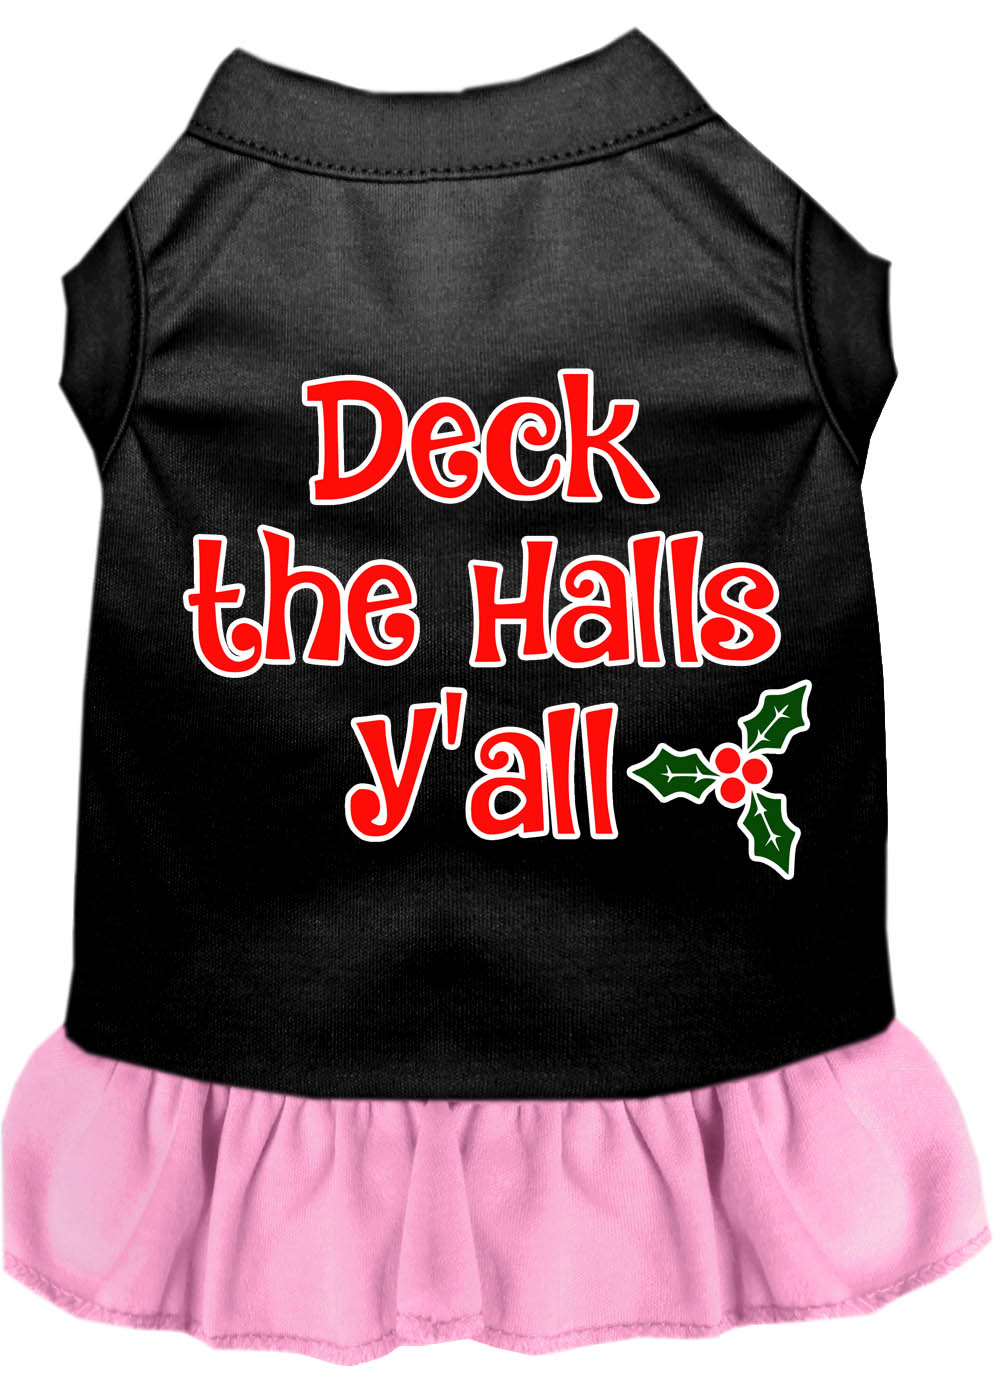 Deck the Halls Y'all Screen Print Dog Dress Black with Light Pink XL